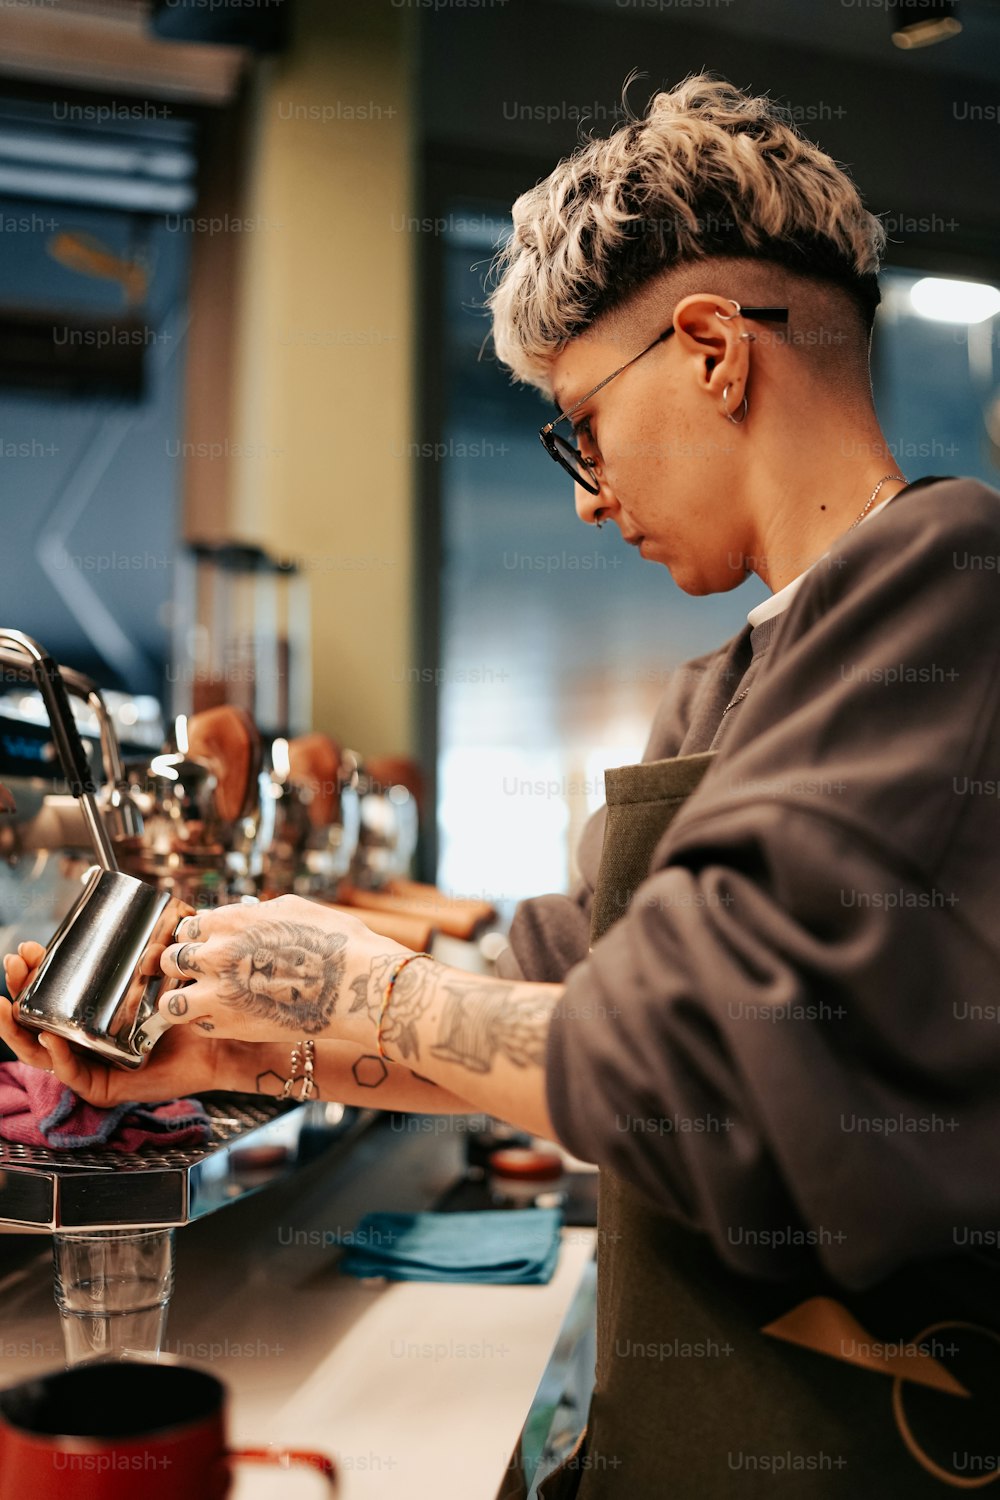 a woman with a tattoo on her arm is filling a cup of coffee